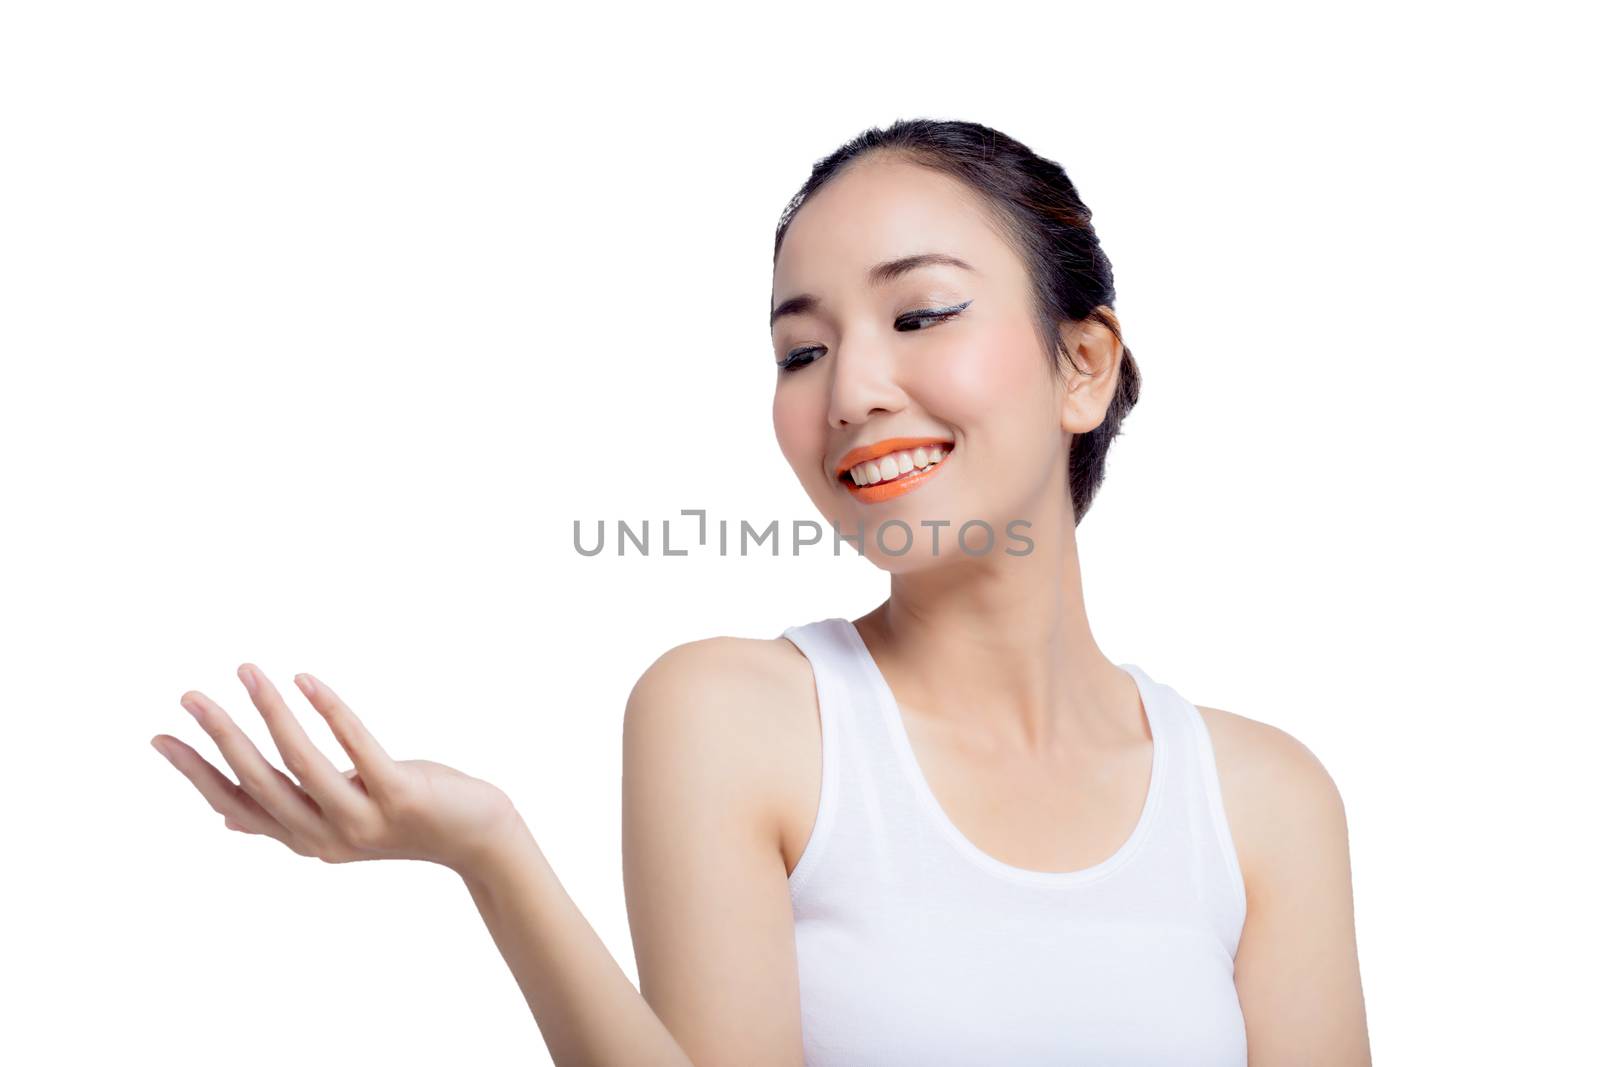 Beauty spa woman with perfect face skin Portrait. Beautiful Spa Girl showing empty copy space on the open hand palm for text. Proposing a product. Gesture for advertisement. Isolated on white background